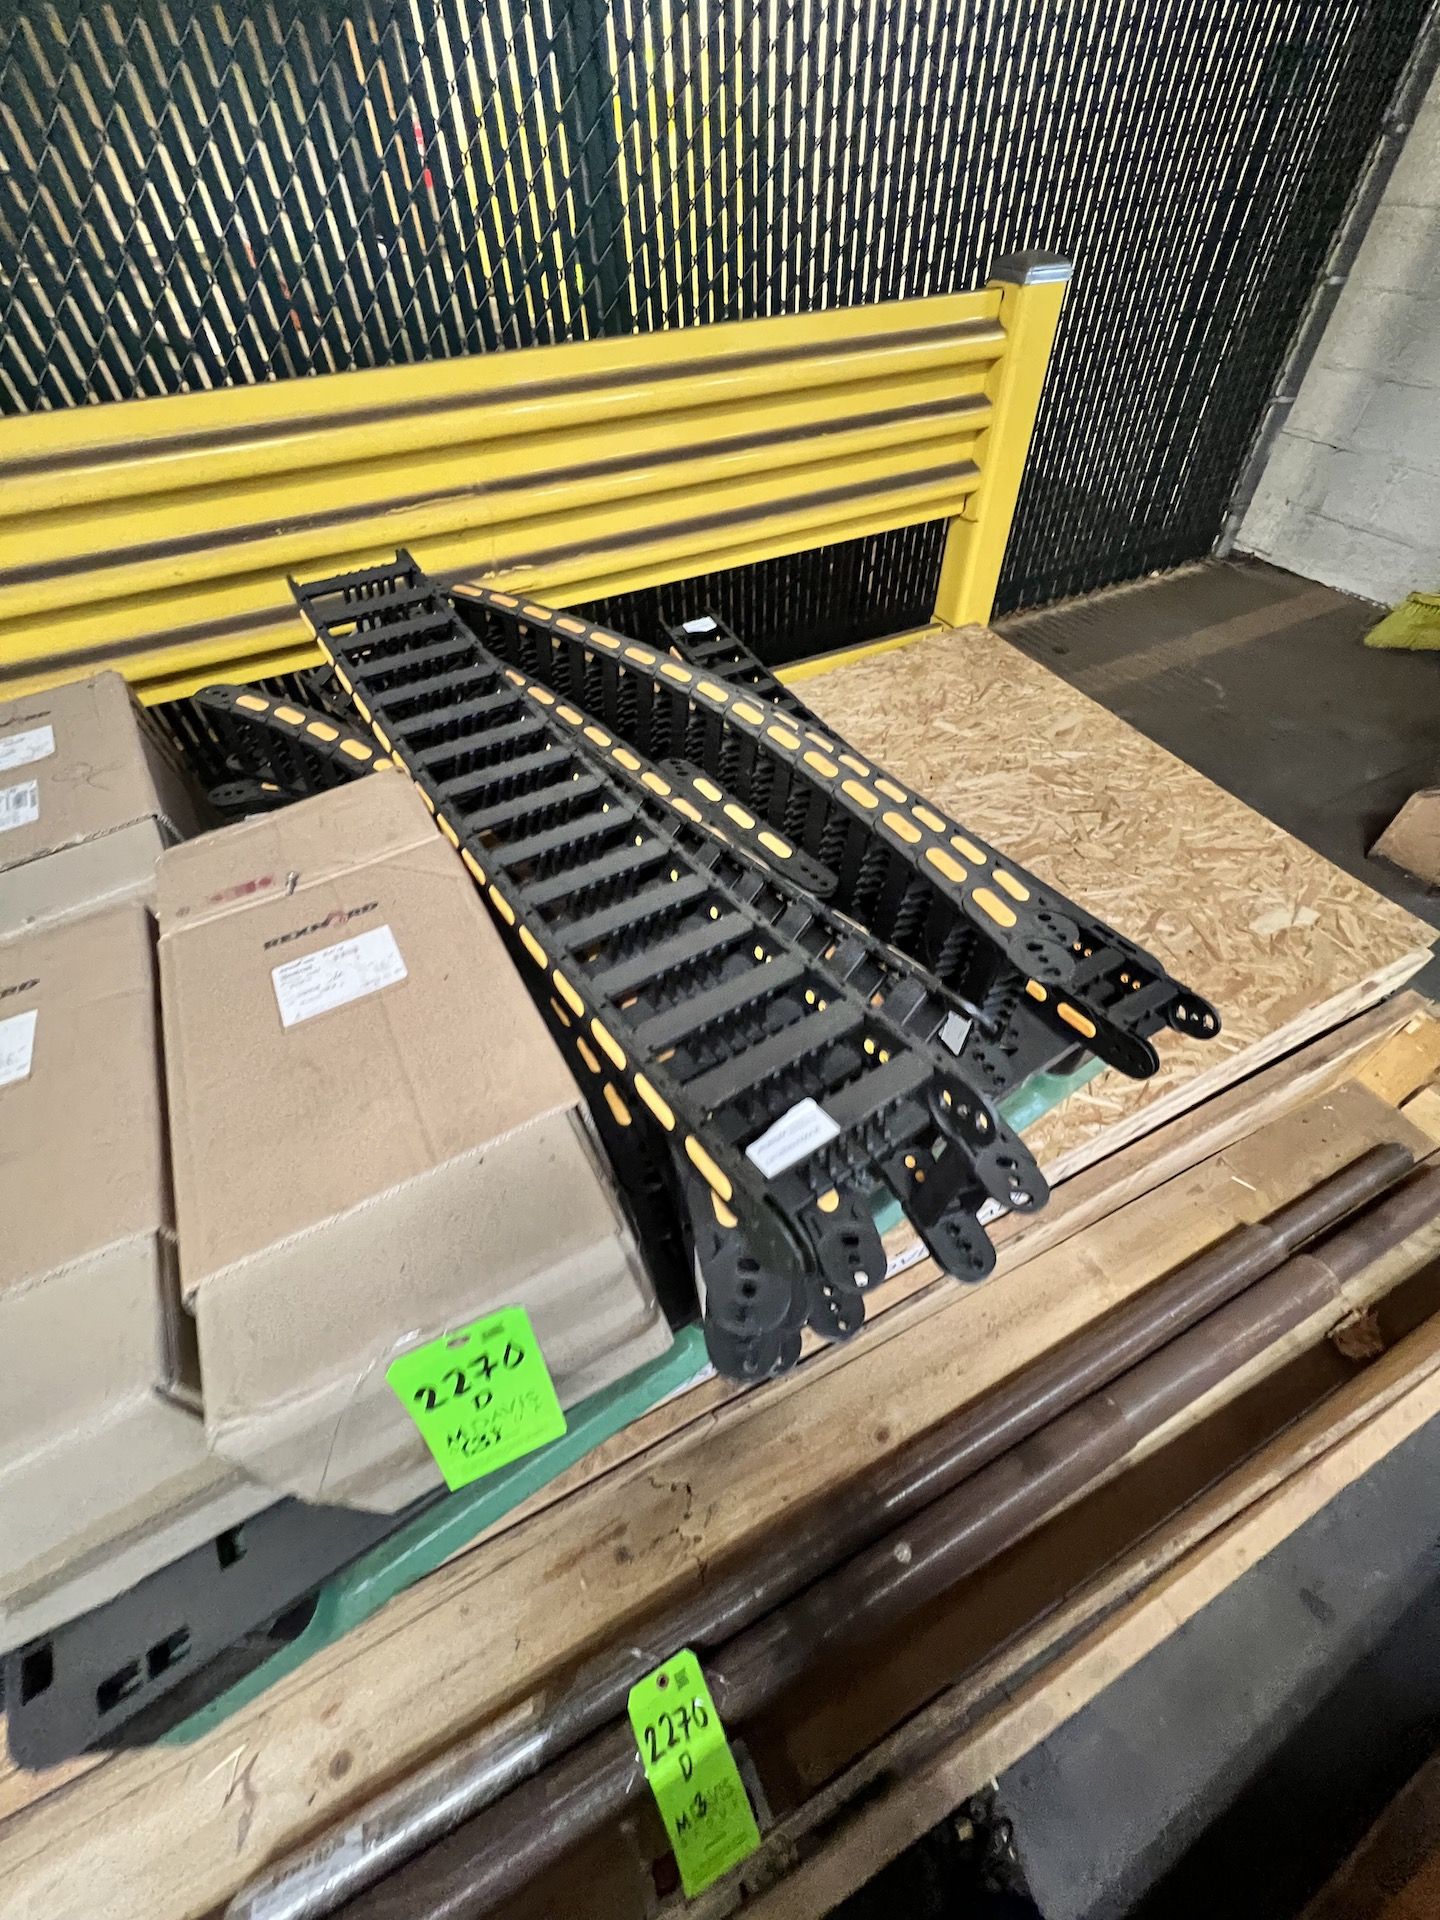 PALLETIZER SPARE PARTS AND MRO, INCLUDES MATTOP CONVEYOR (1785MM/1505 HP), (3) BOXES OF REXNORD - Image 7 of 8